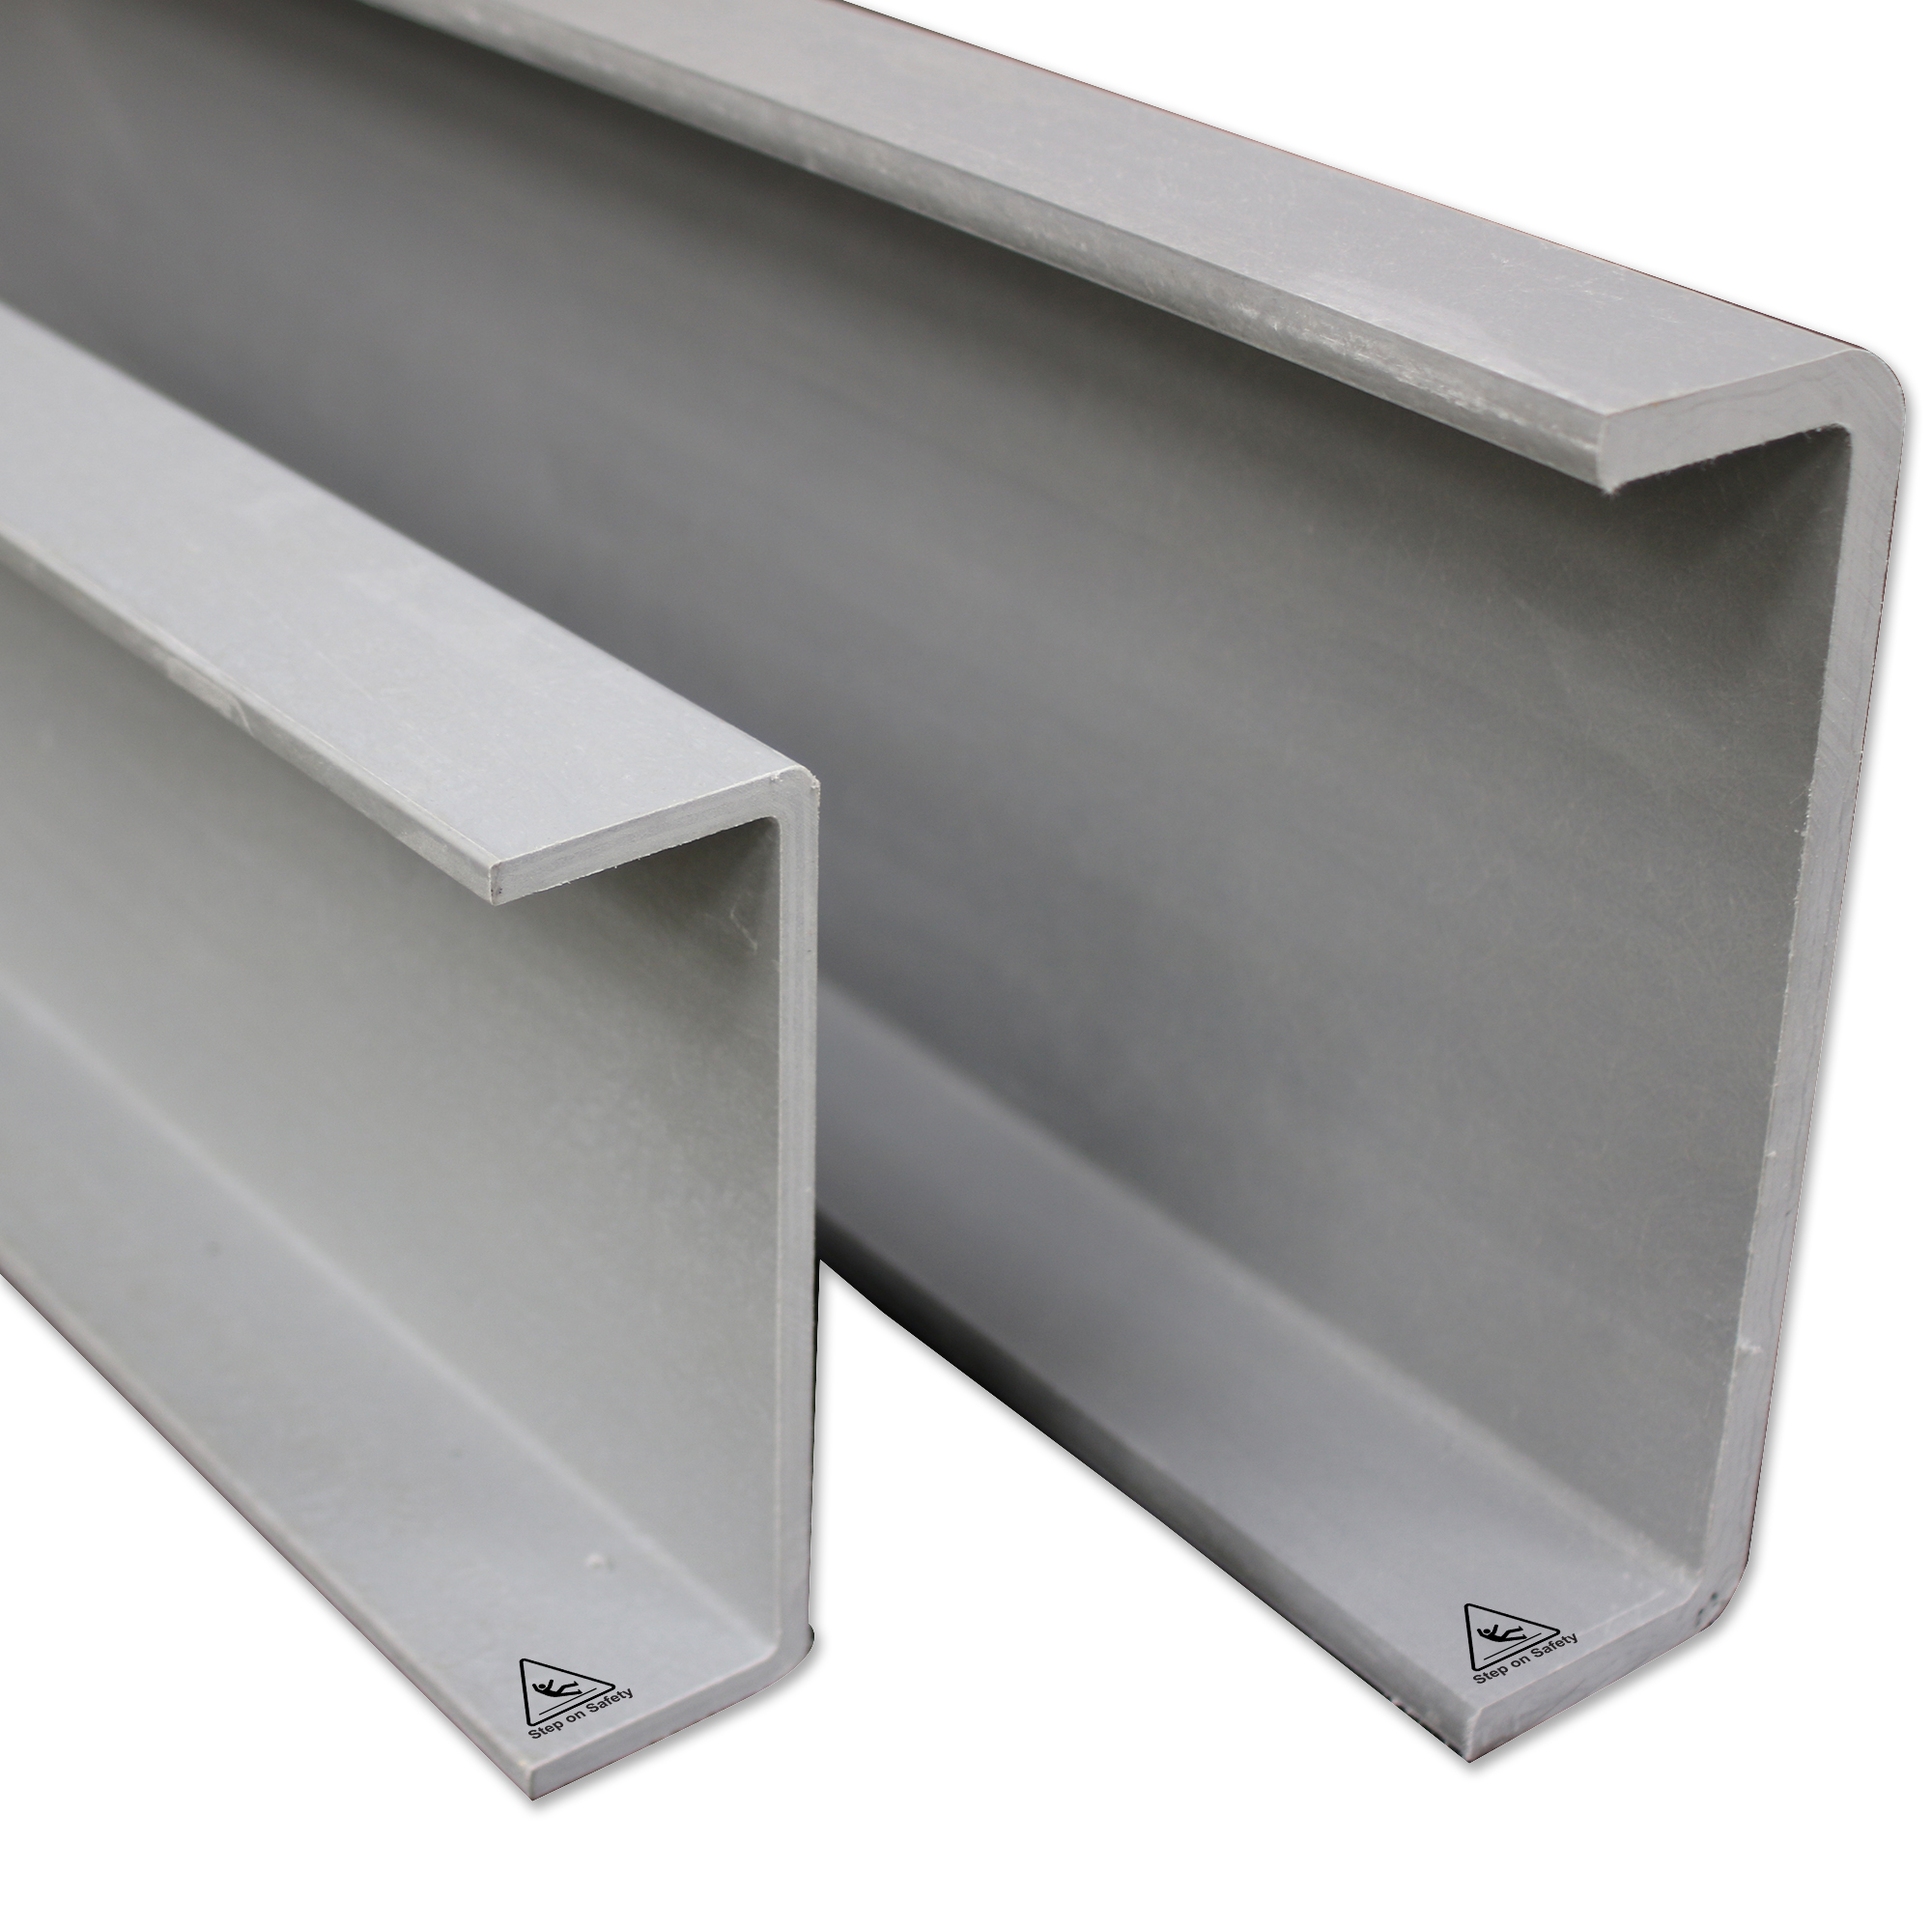 Channel GRP structural profiles